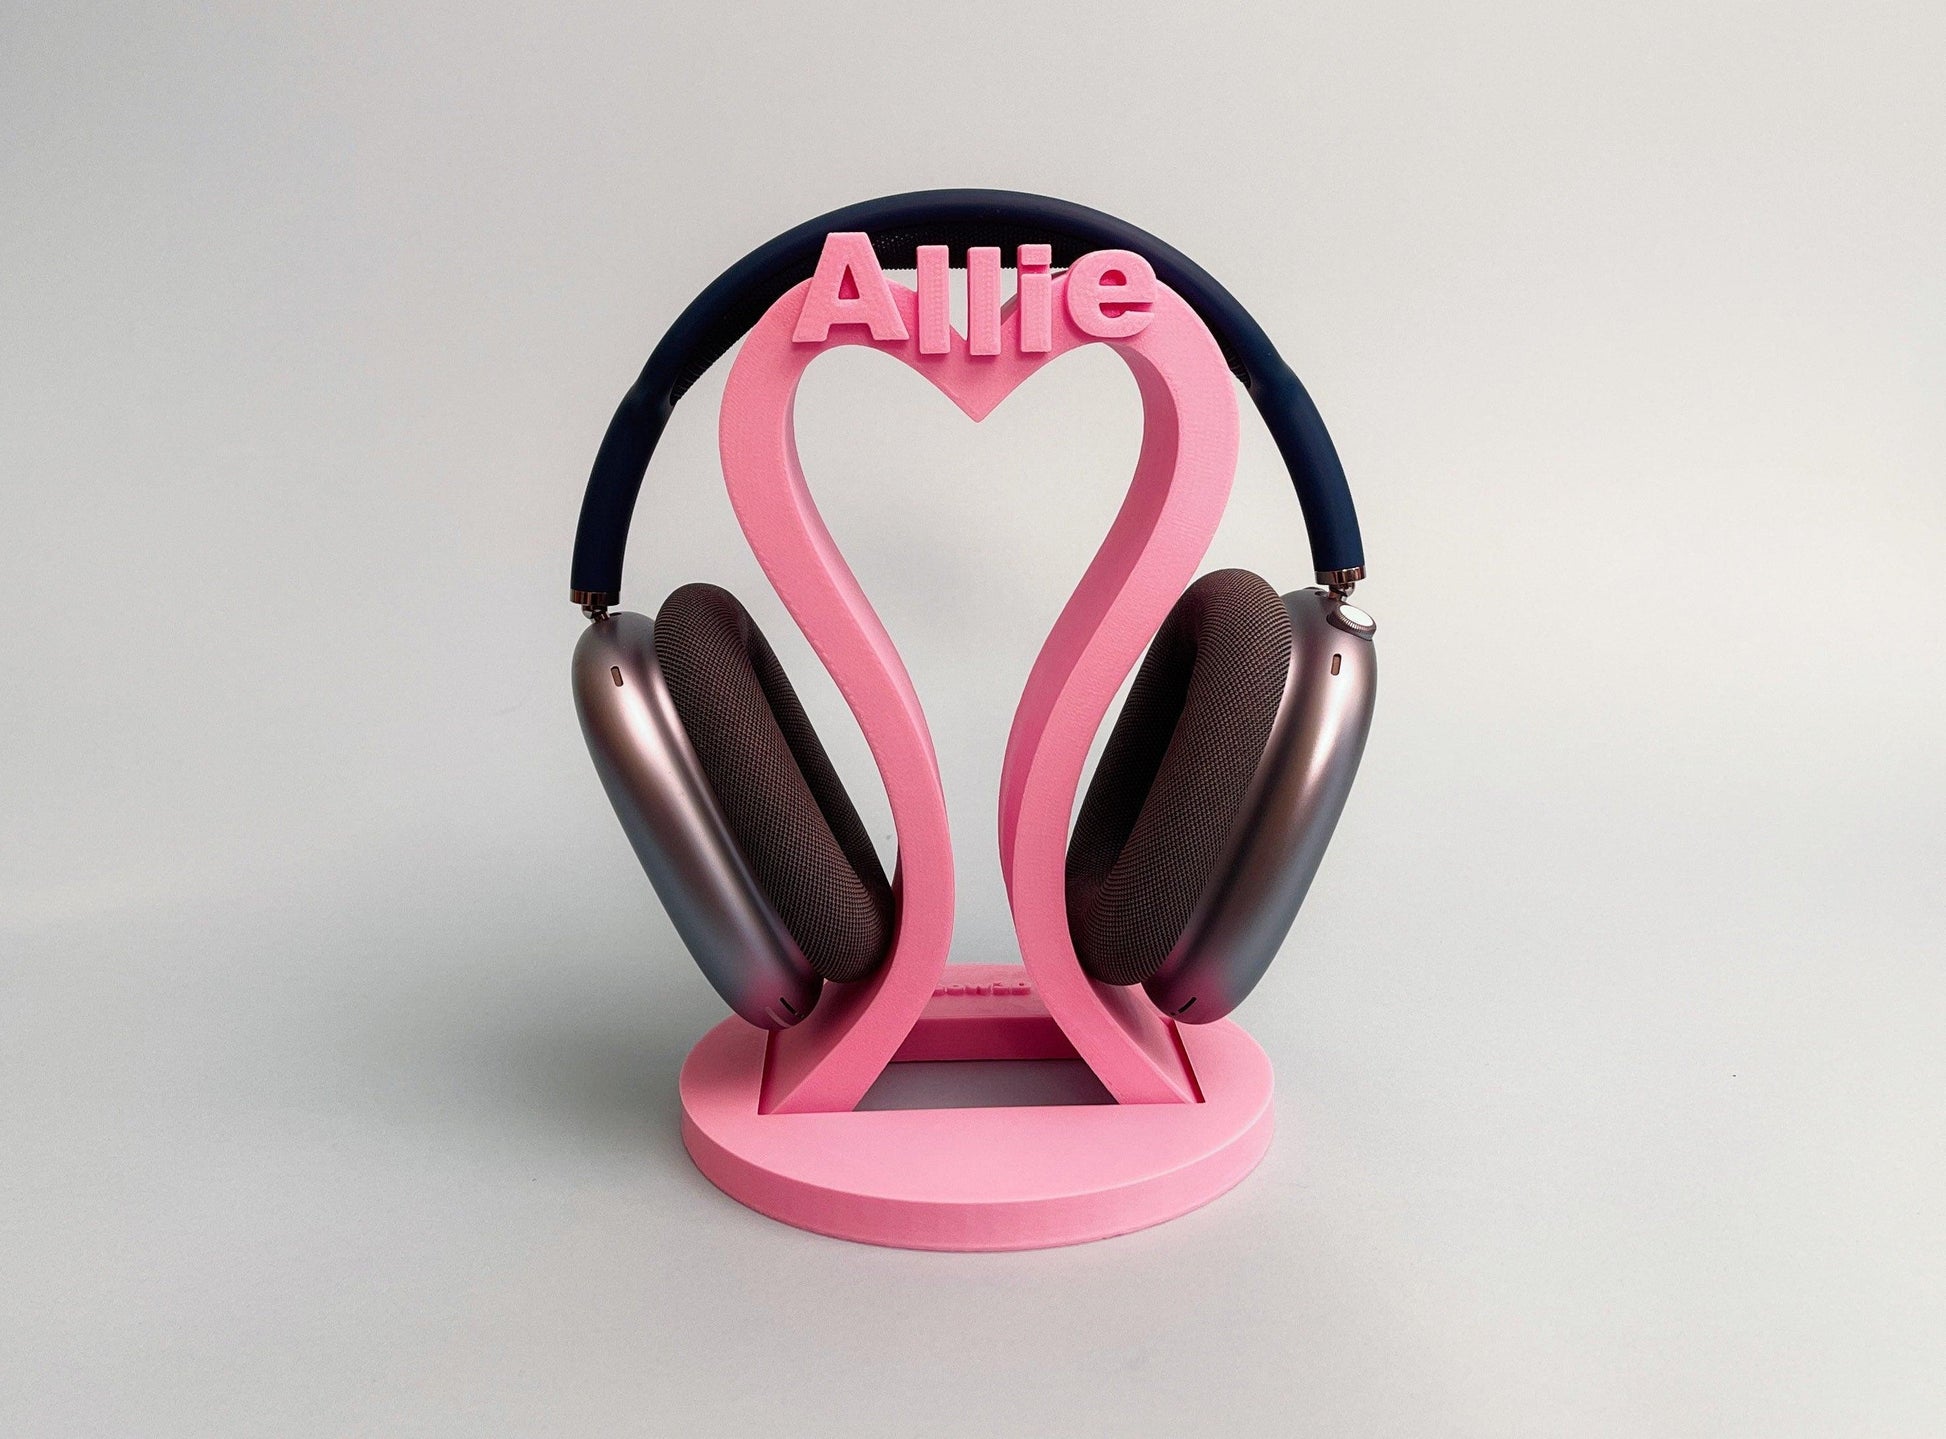 Custom headphone stand, Father's Day Gift, Personalized gifts, Gamer gifts, Tech Accessory, Love, Gifts for men, Husband Gift, DJ Gift, Game tag - Meow3D